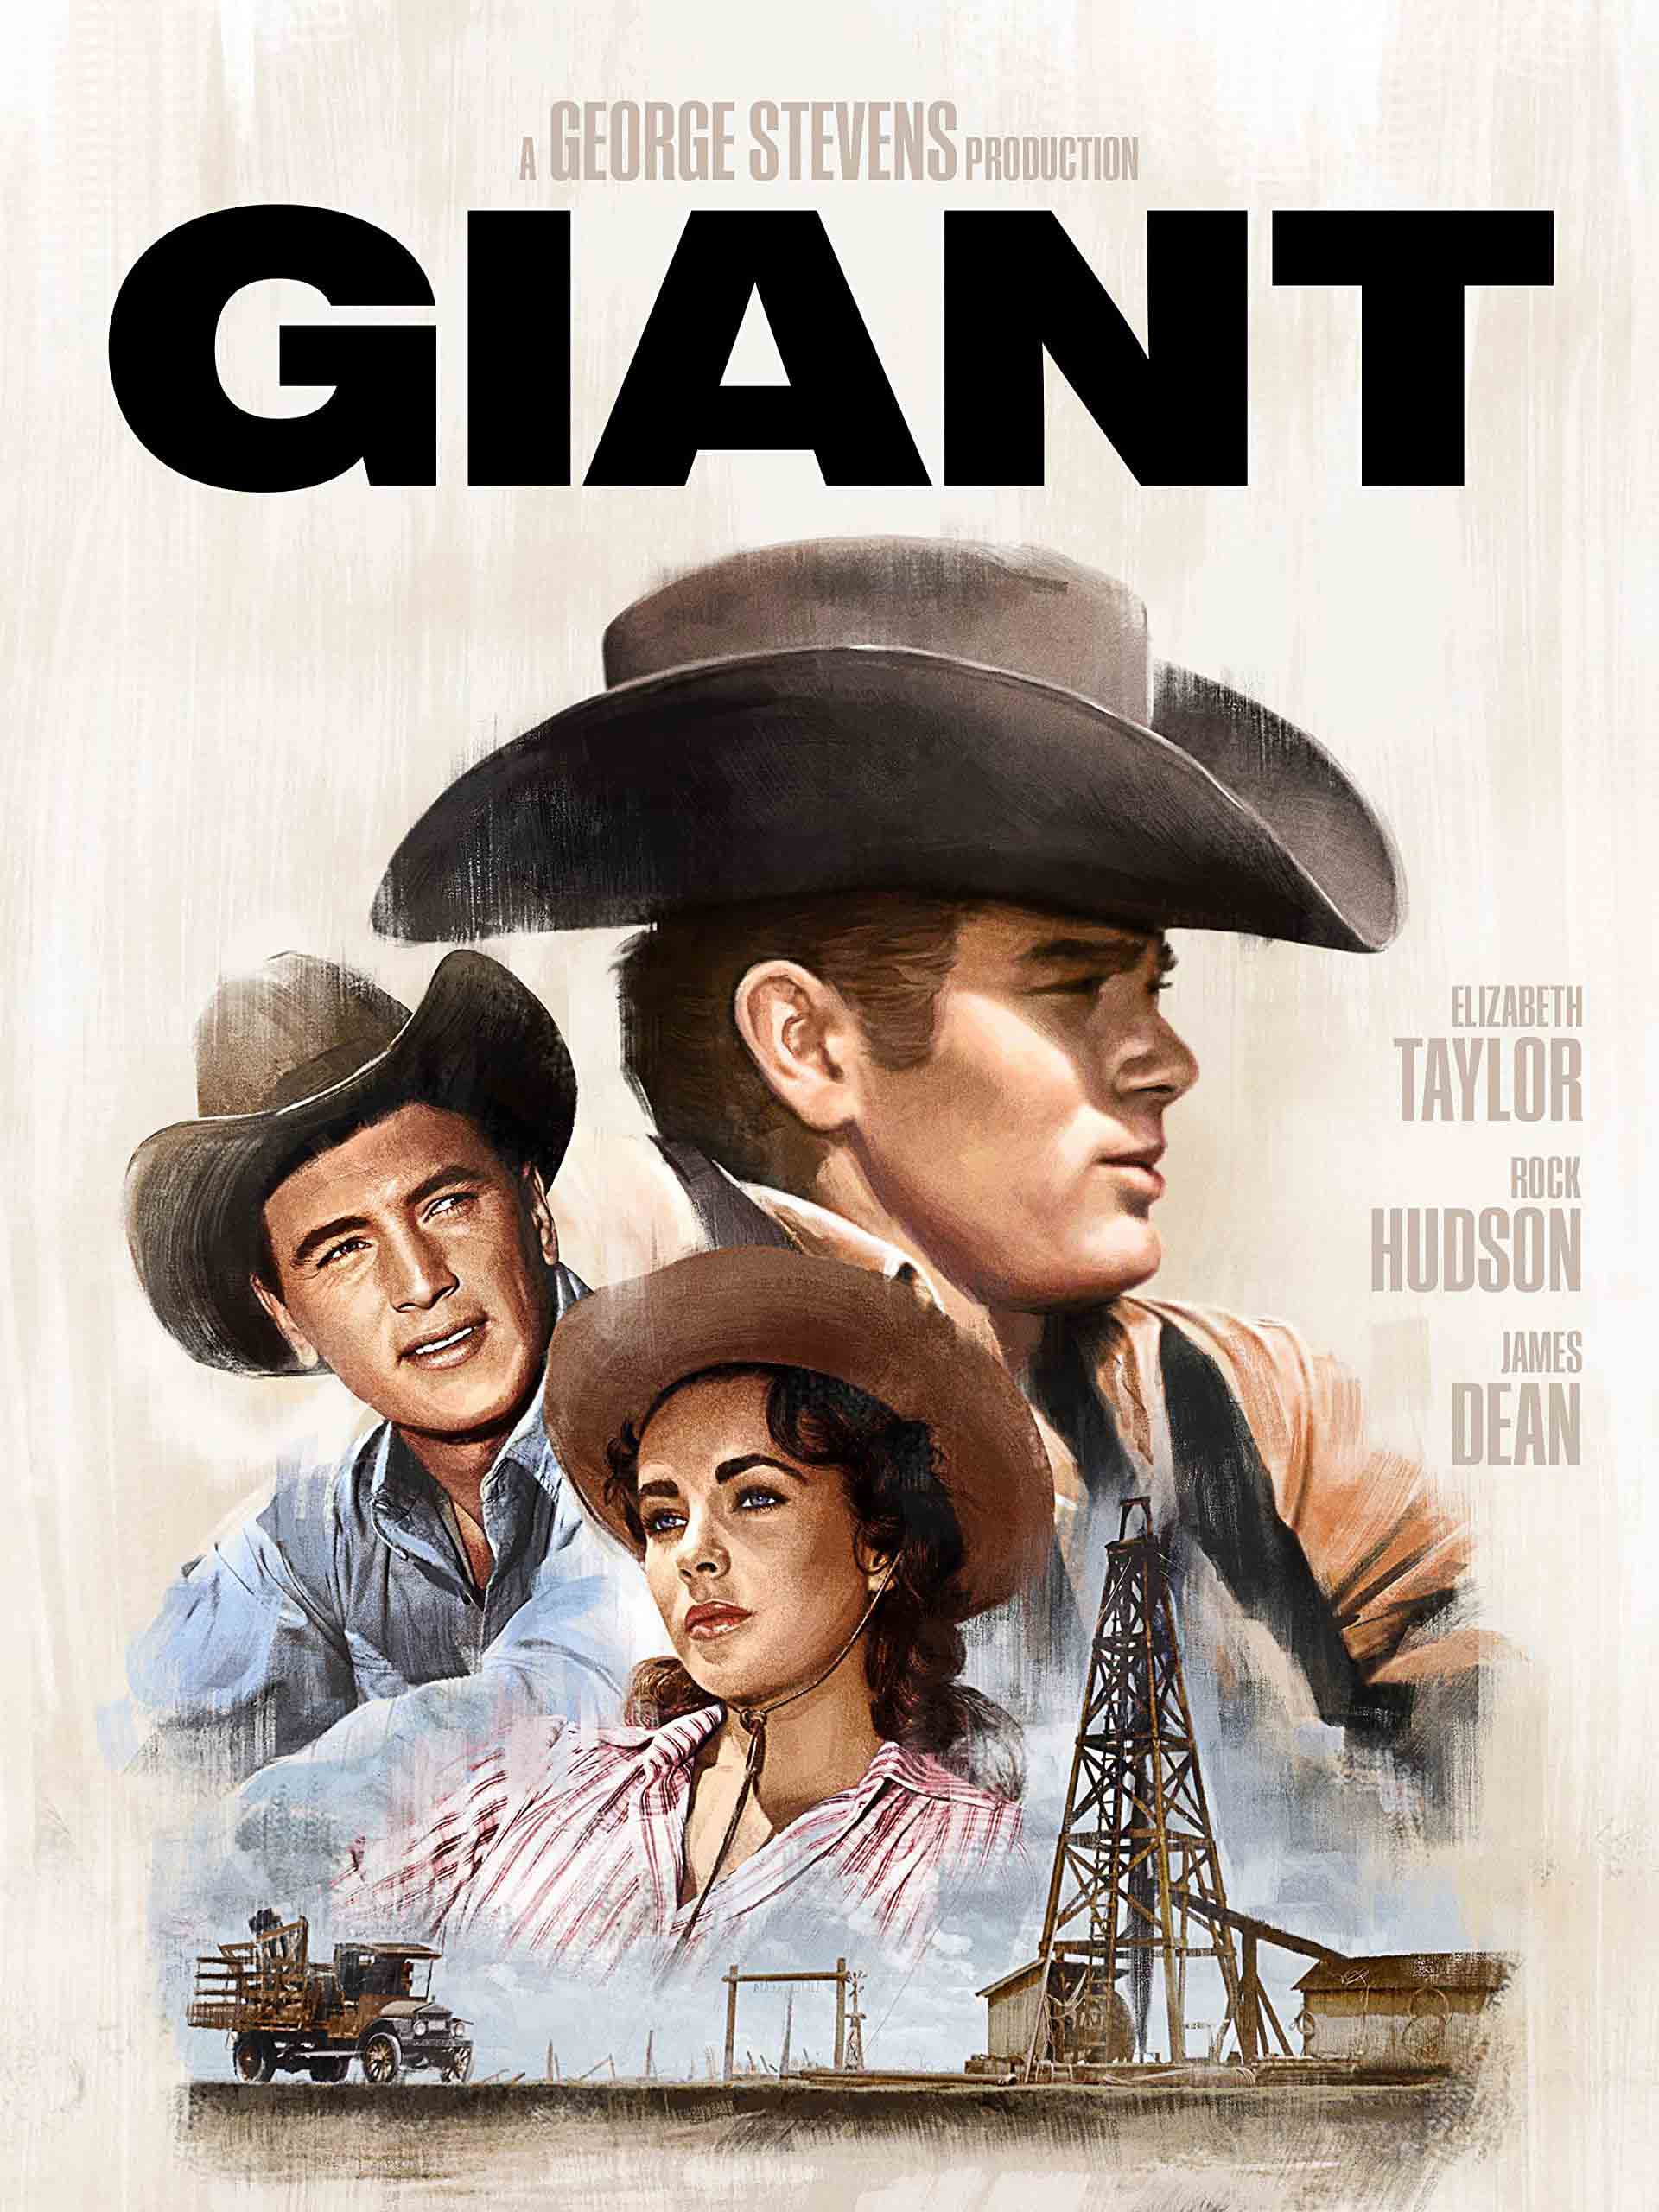 Giant movie poster